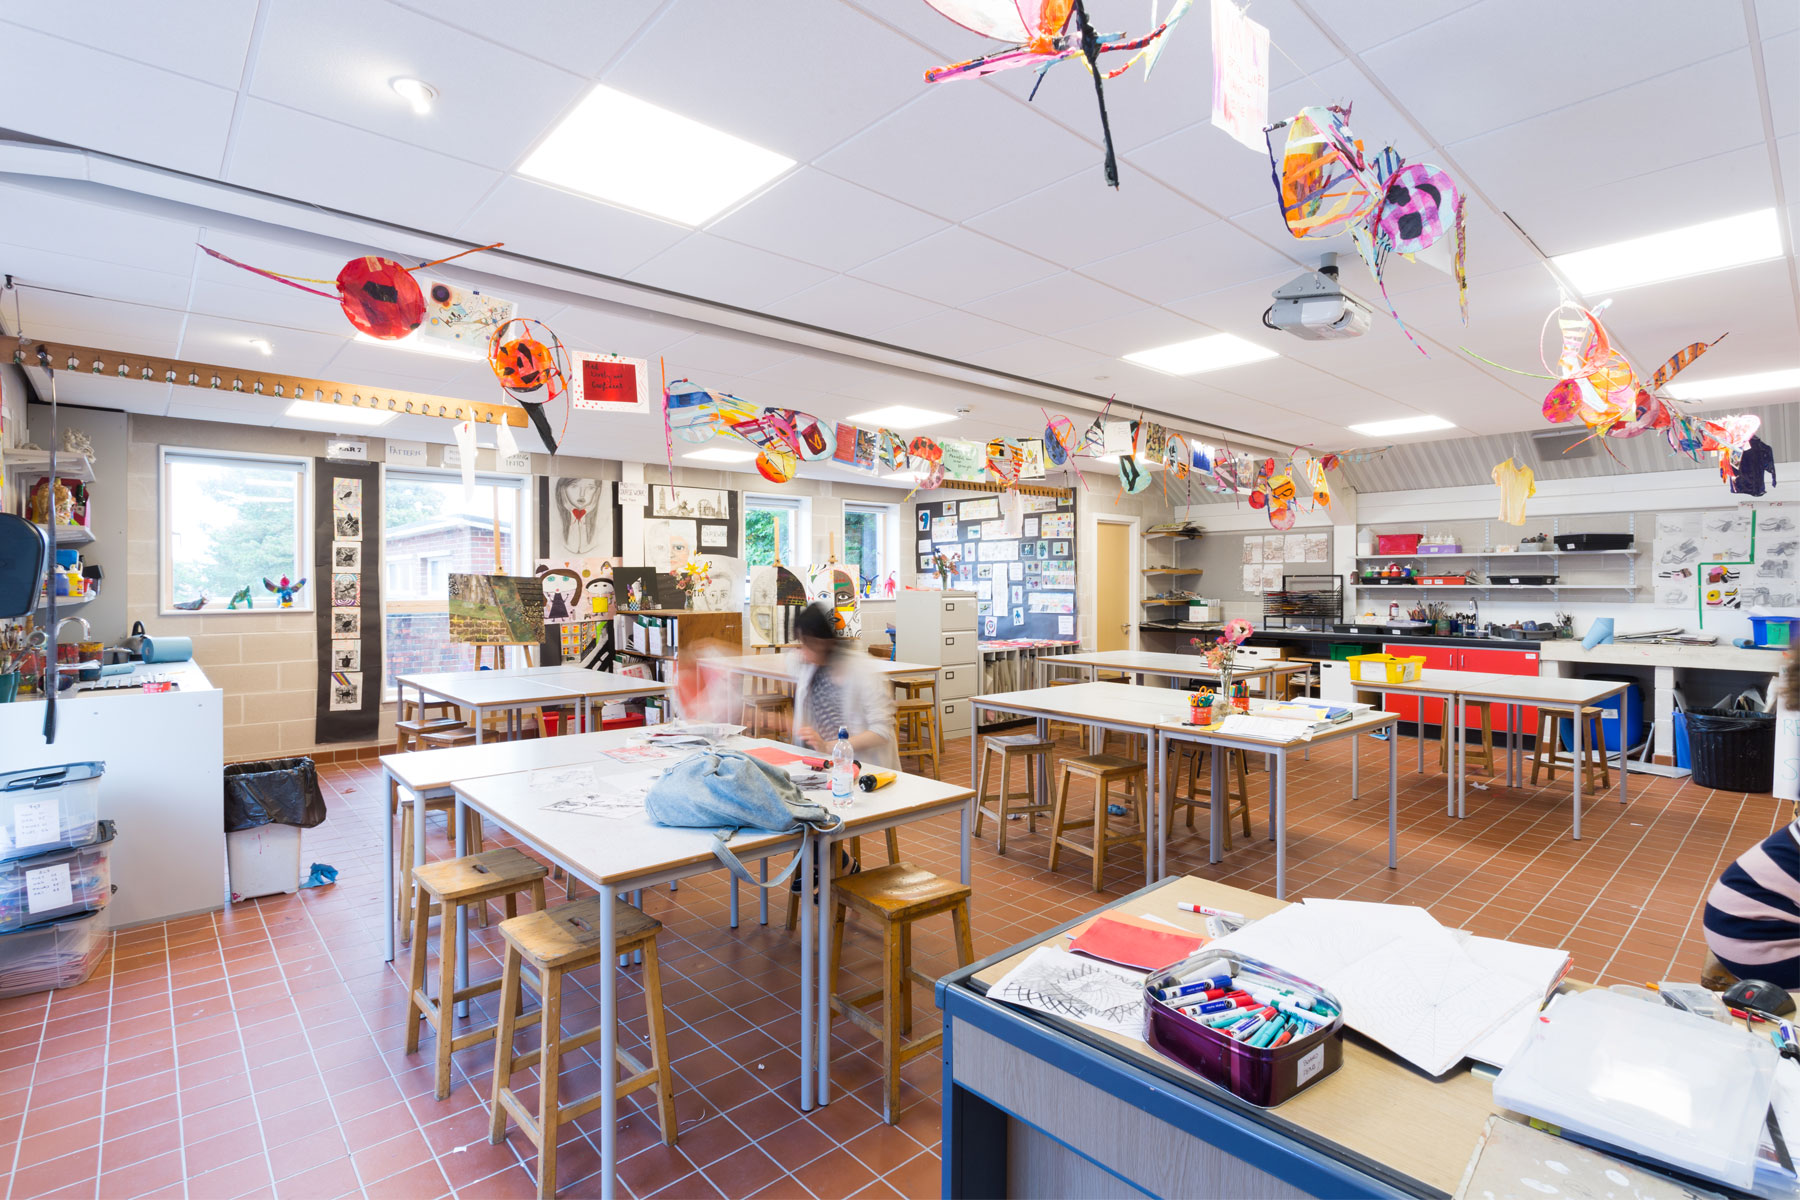 Guildford County School- New Art Block with Clay Room